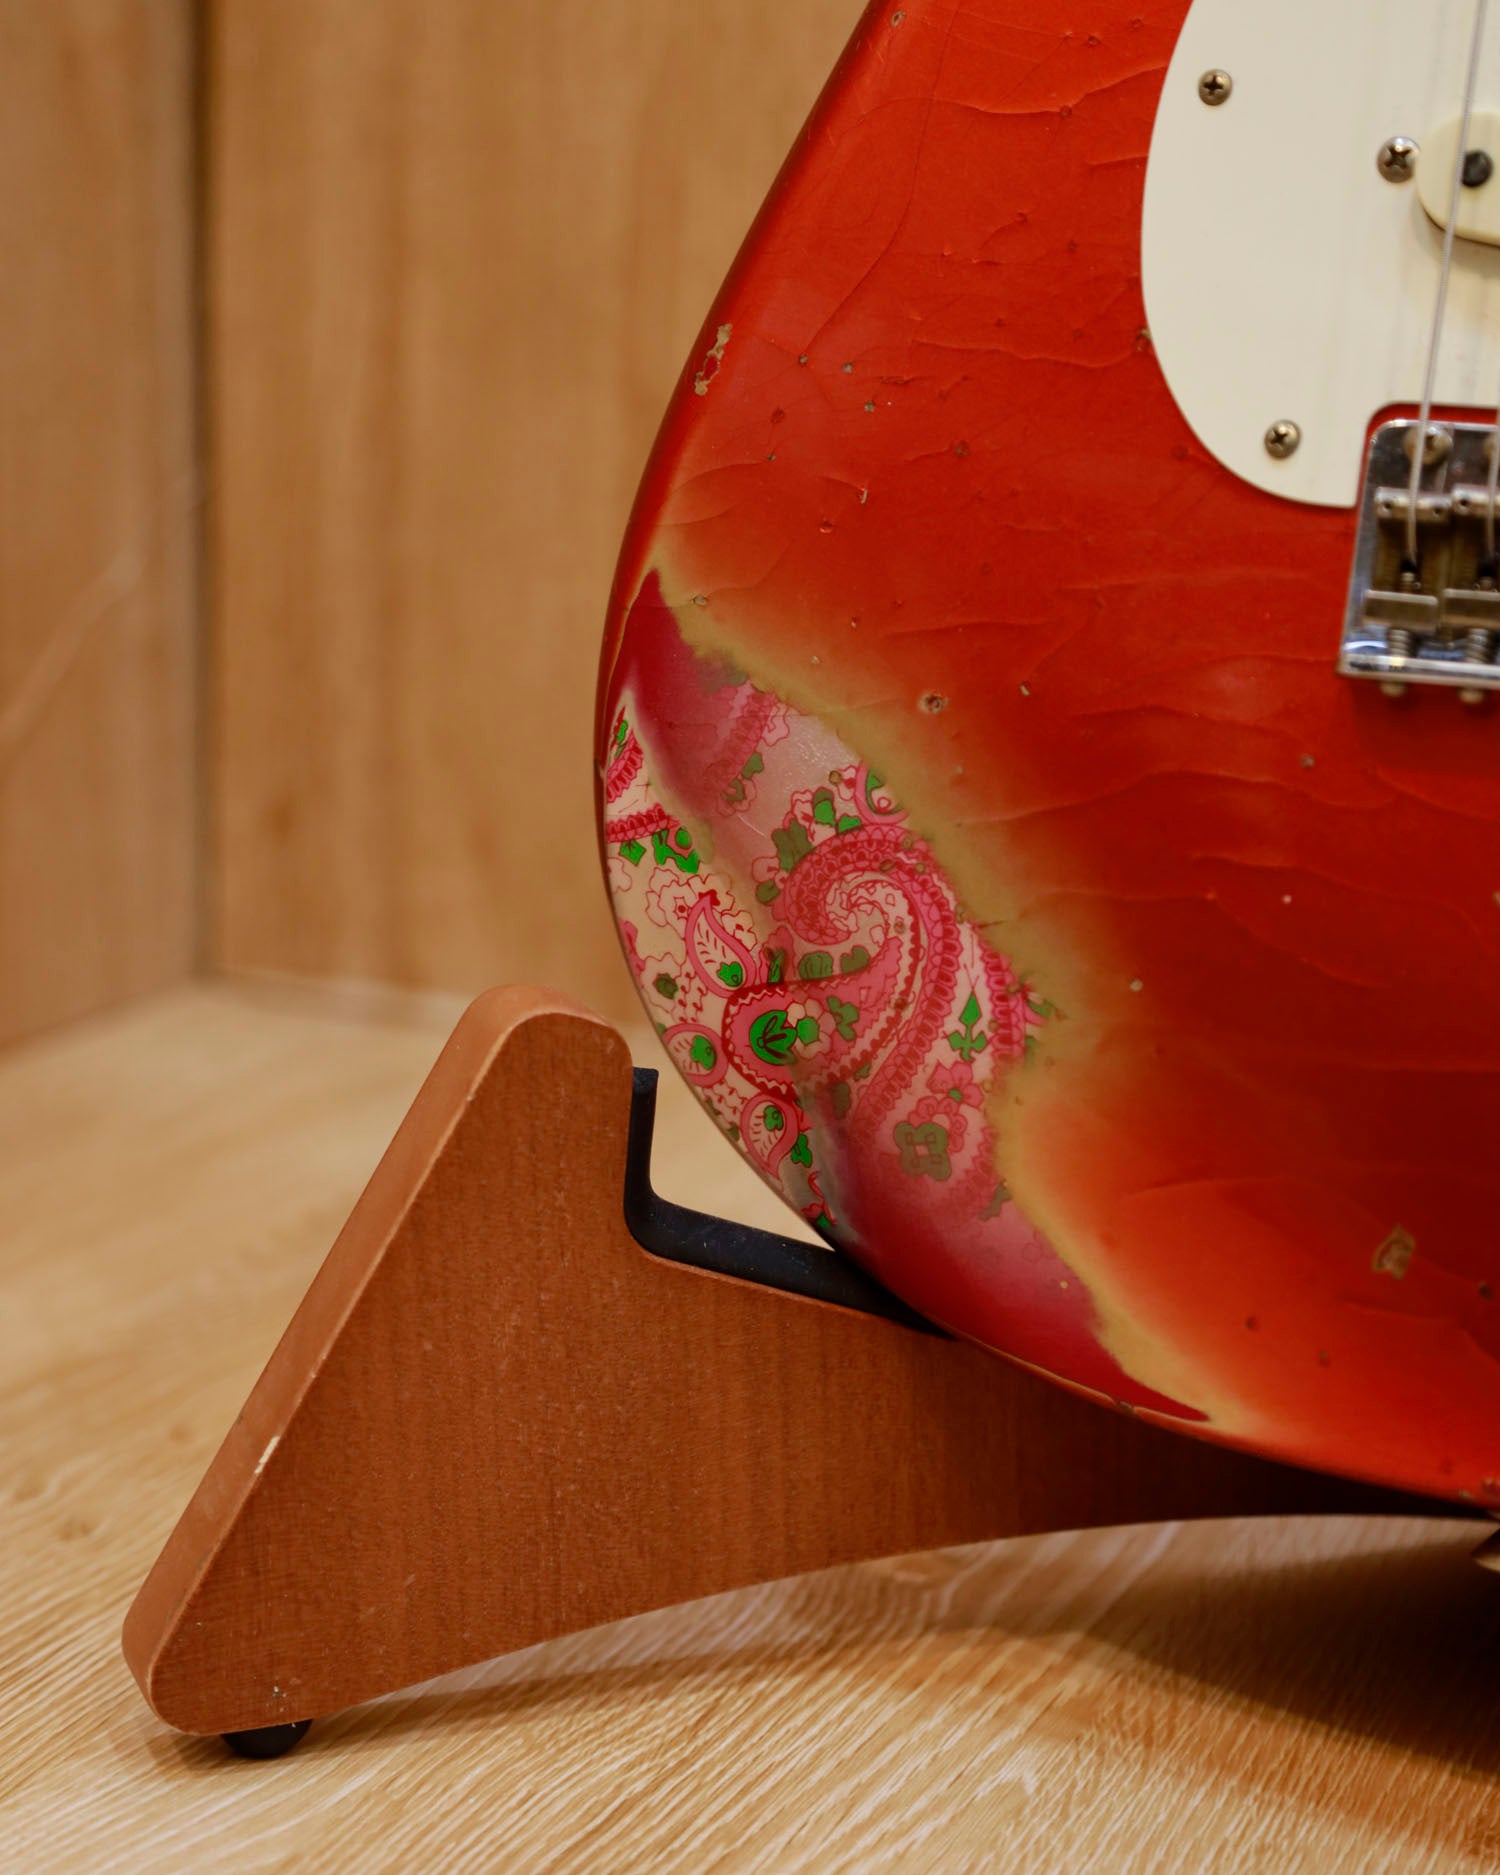 Fender LIMITED EDITION MISCHIEF MAKER - HEAVY RELIC®, SUPER FADED AGED CANDY APPLE RED OVER PINK PAISLEY